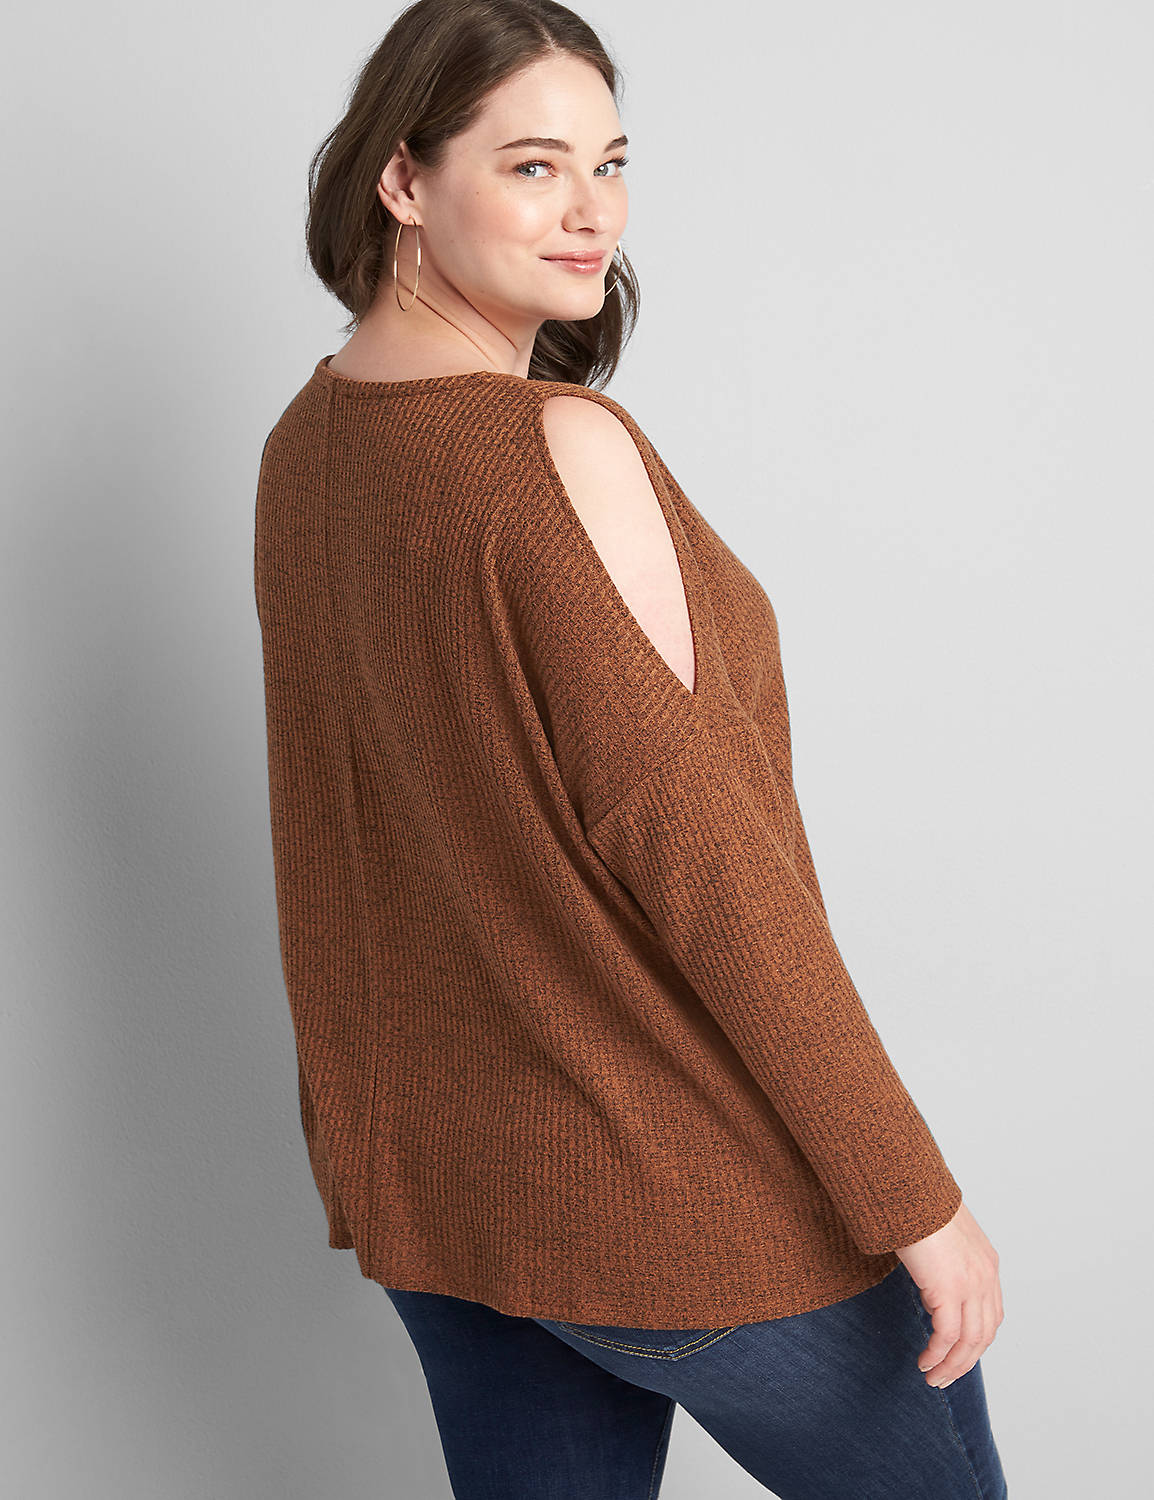 Long Sleeve Open Crew Neck With Cutout Shoulders In Brushed Waffle 1121911:PANTONE Argan Oil:14/16 Product Image 2